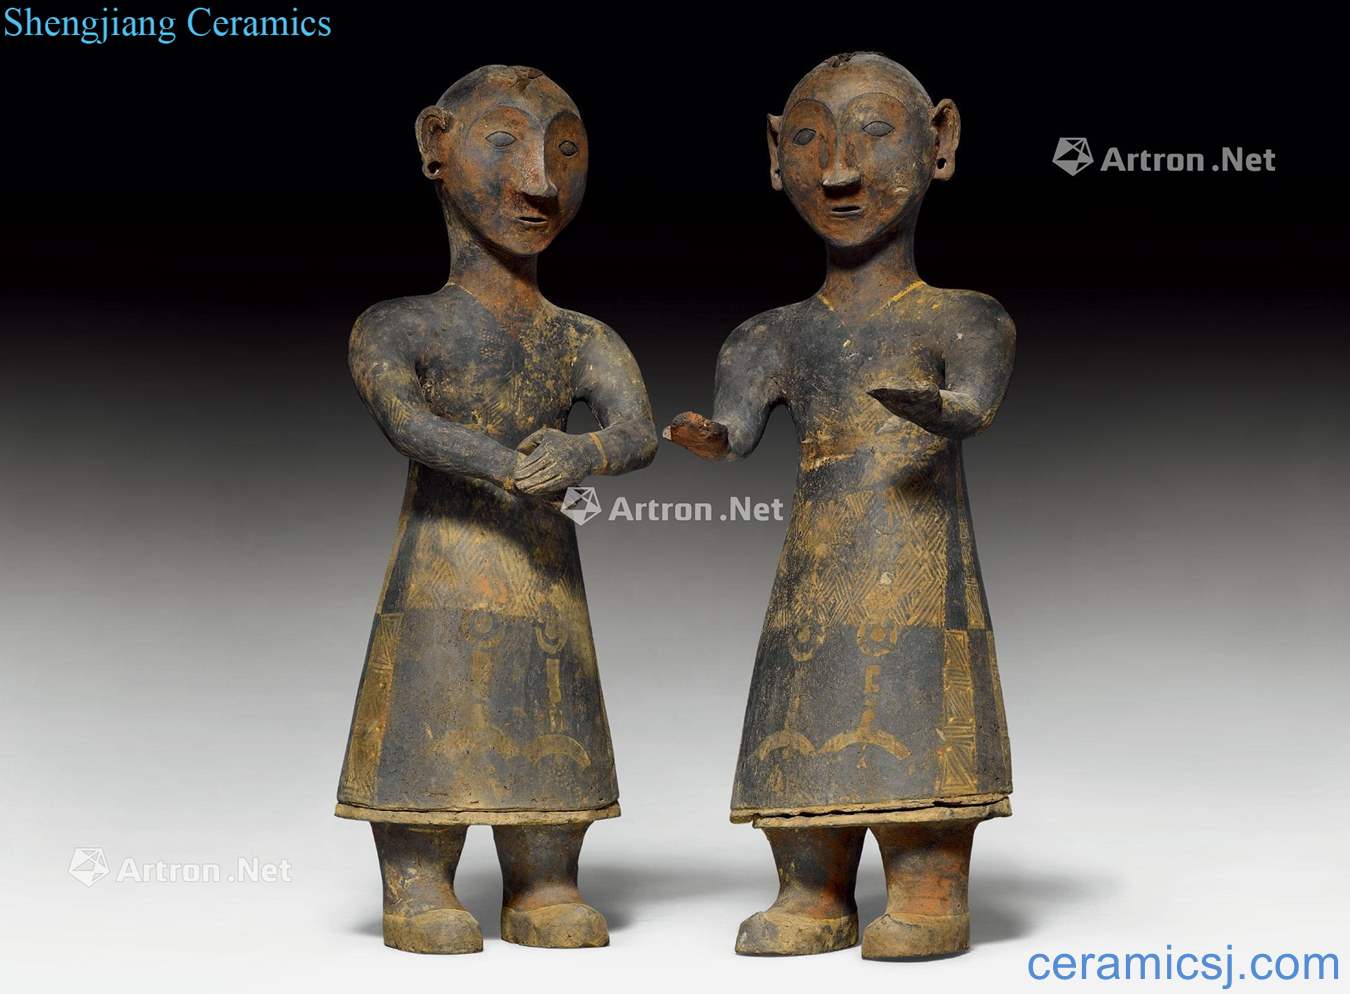 Chu culture TWO POLYCHROME made TWO - PART POTTERY FIGURES.